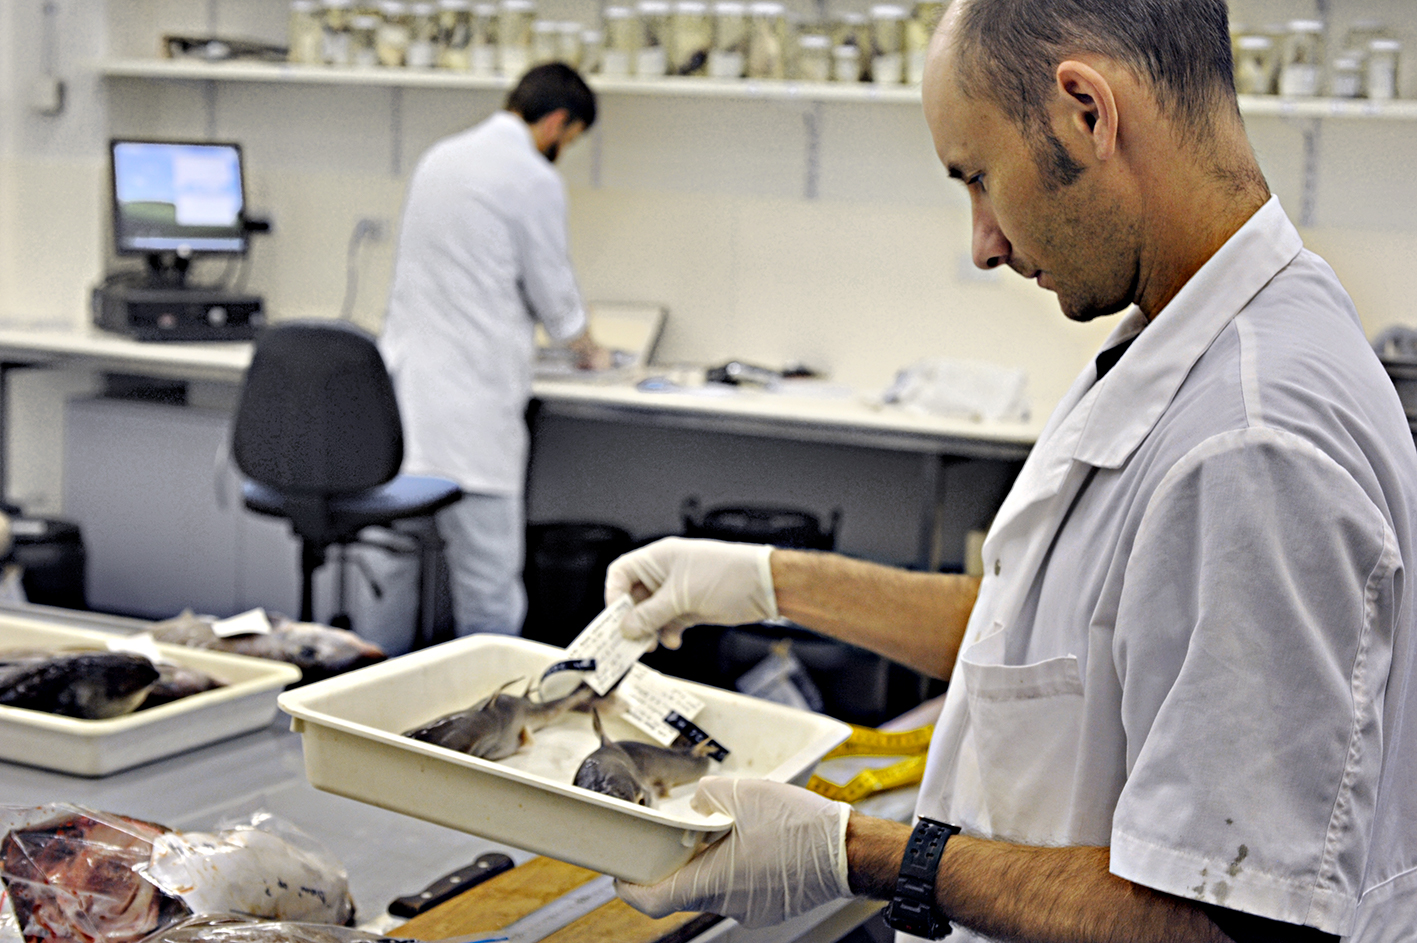 Two scientists wearing white lab coats in a room, one looking at a tray containing preserved fish specimens.